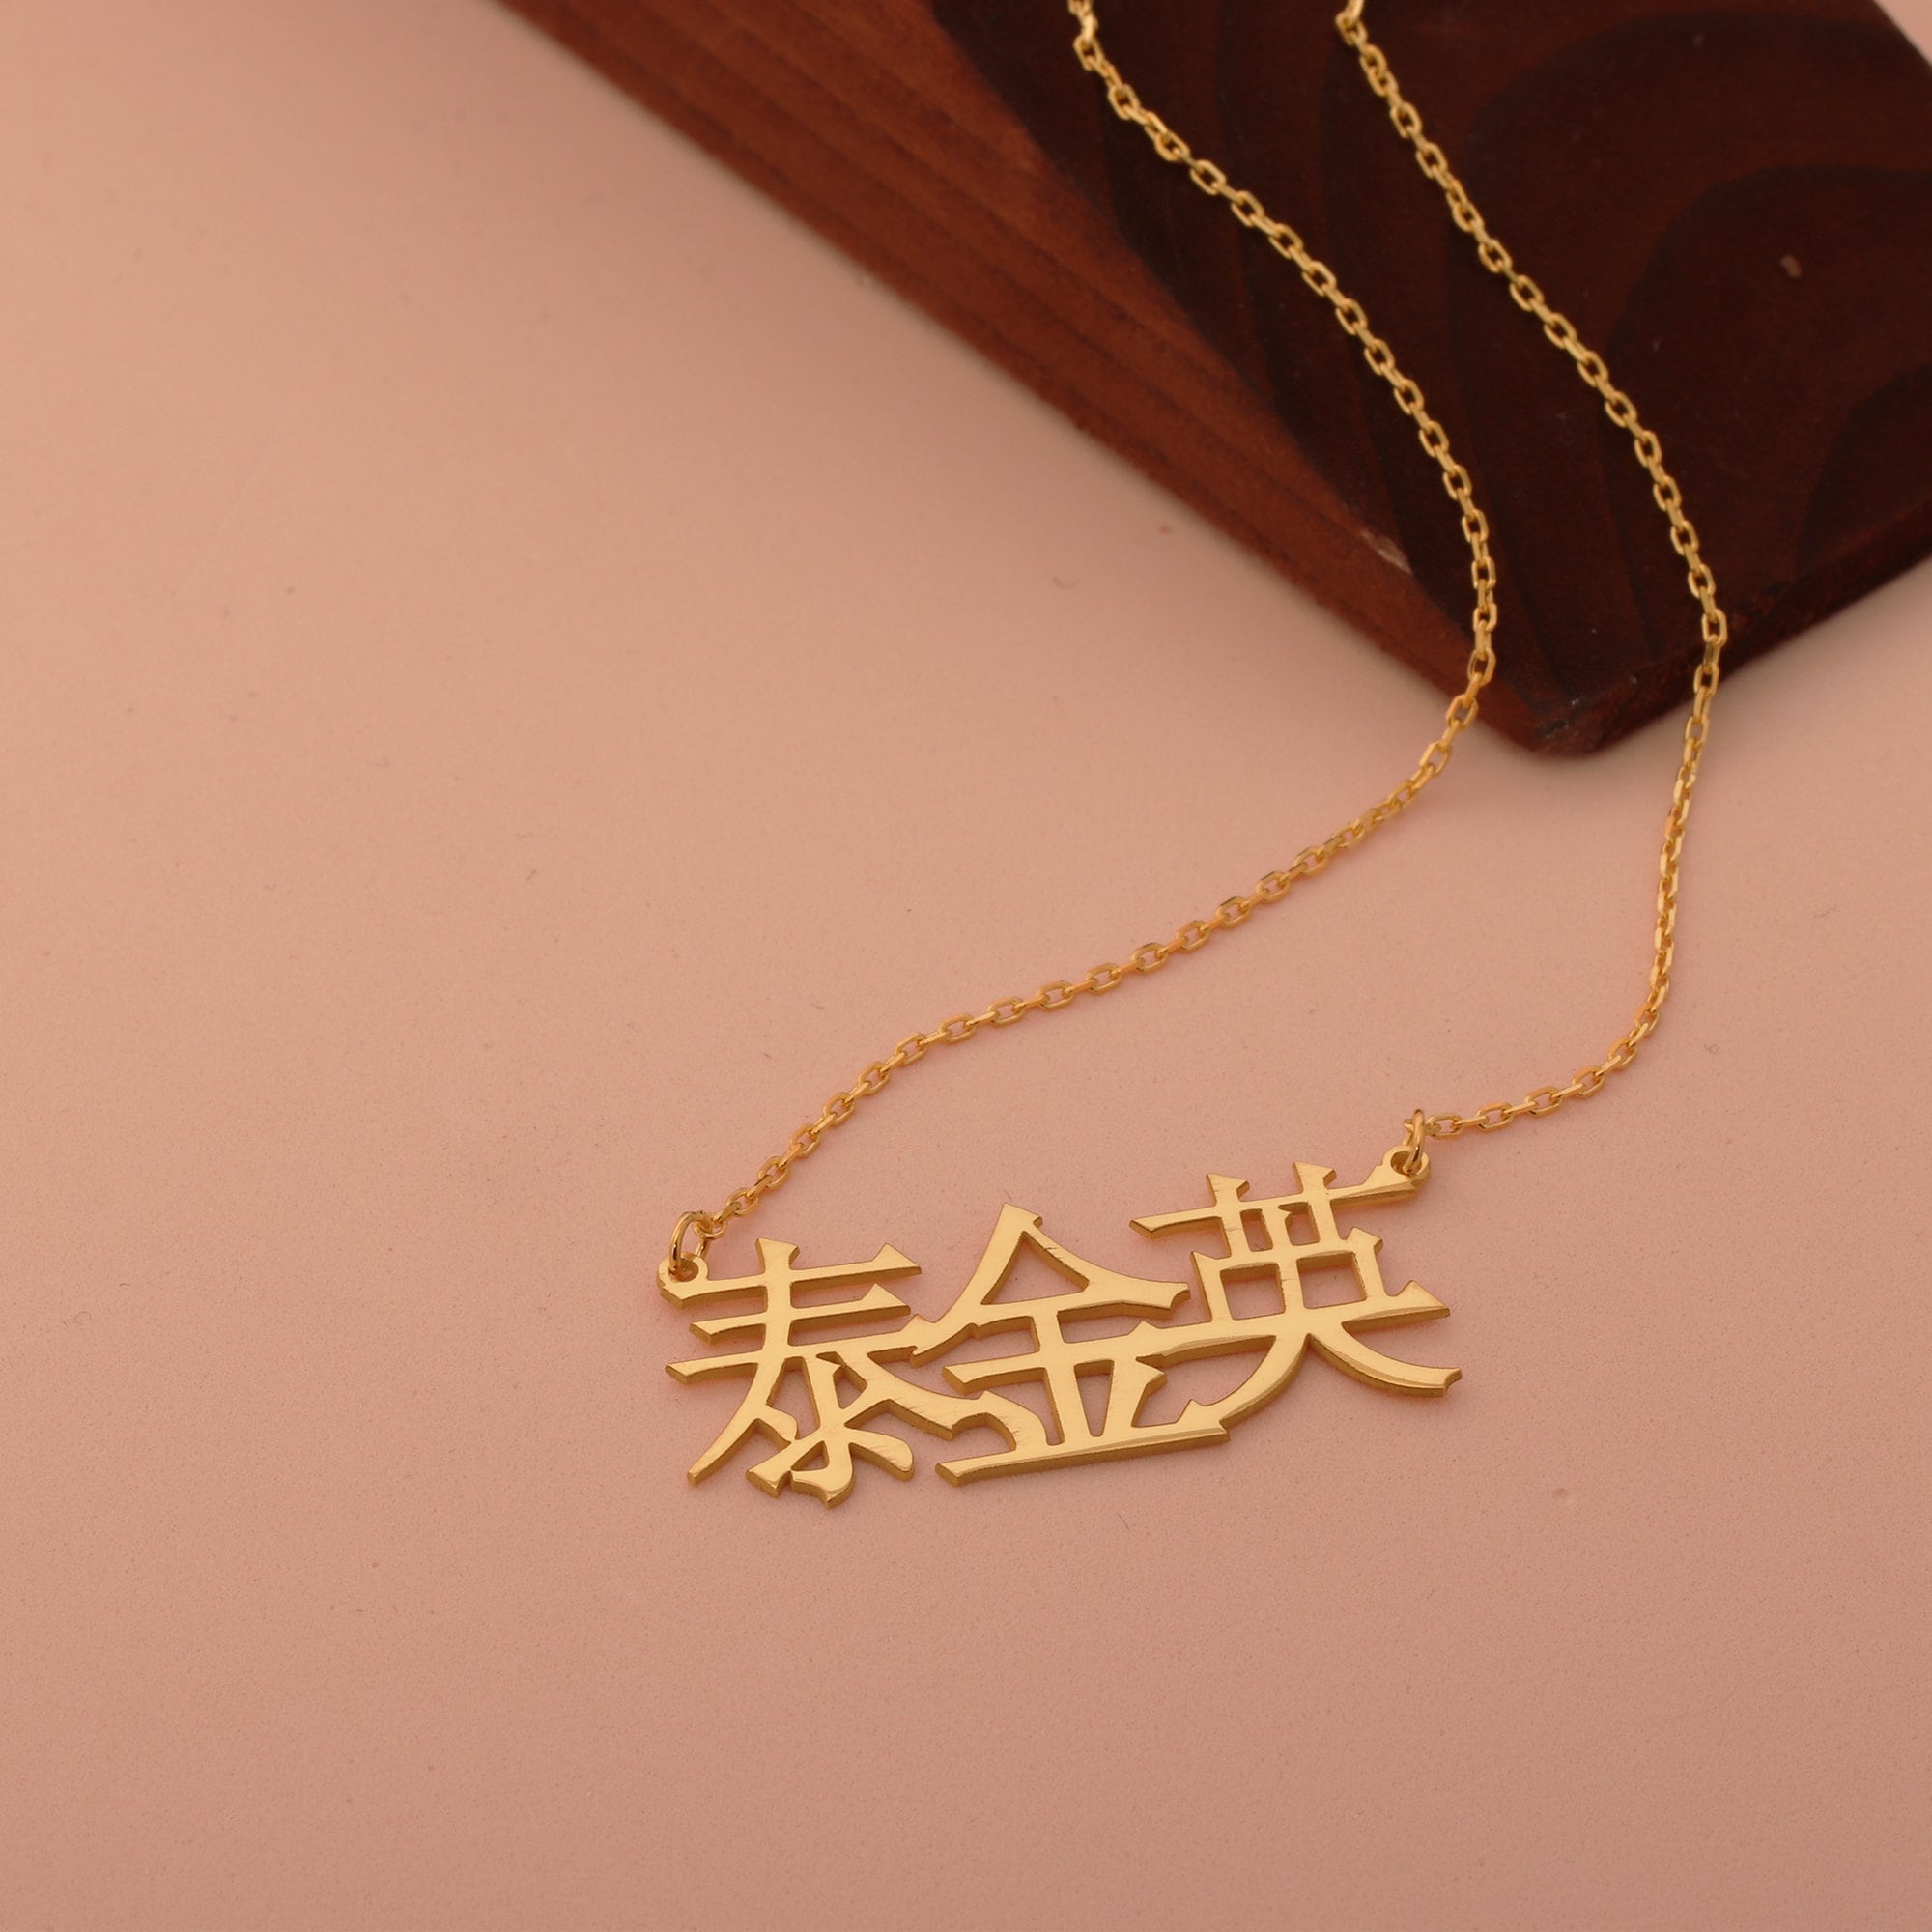 Happiness Necklace, Sterling Silver, Chinese Symbol for Happiness Pendant,  Silver Chinese Character Necklace, Chinese Calligraphy Jewelry - Etsy